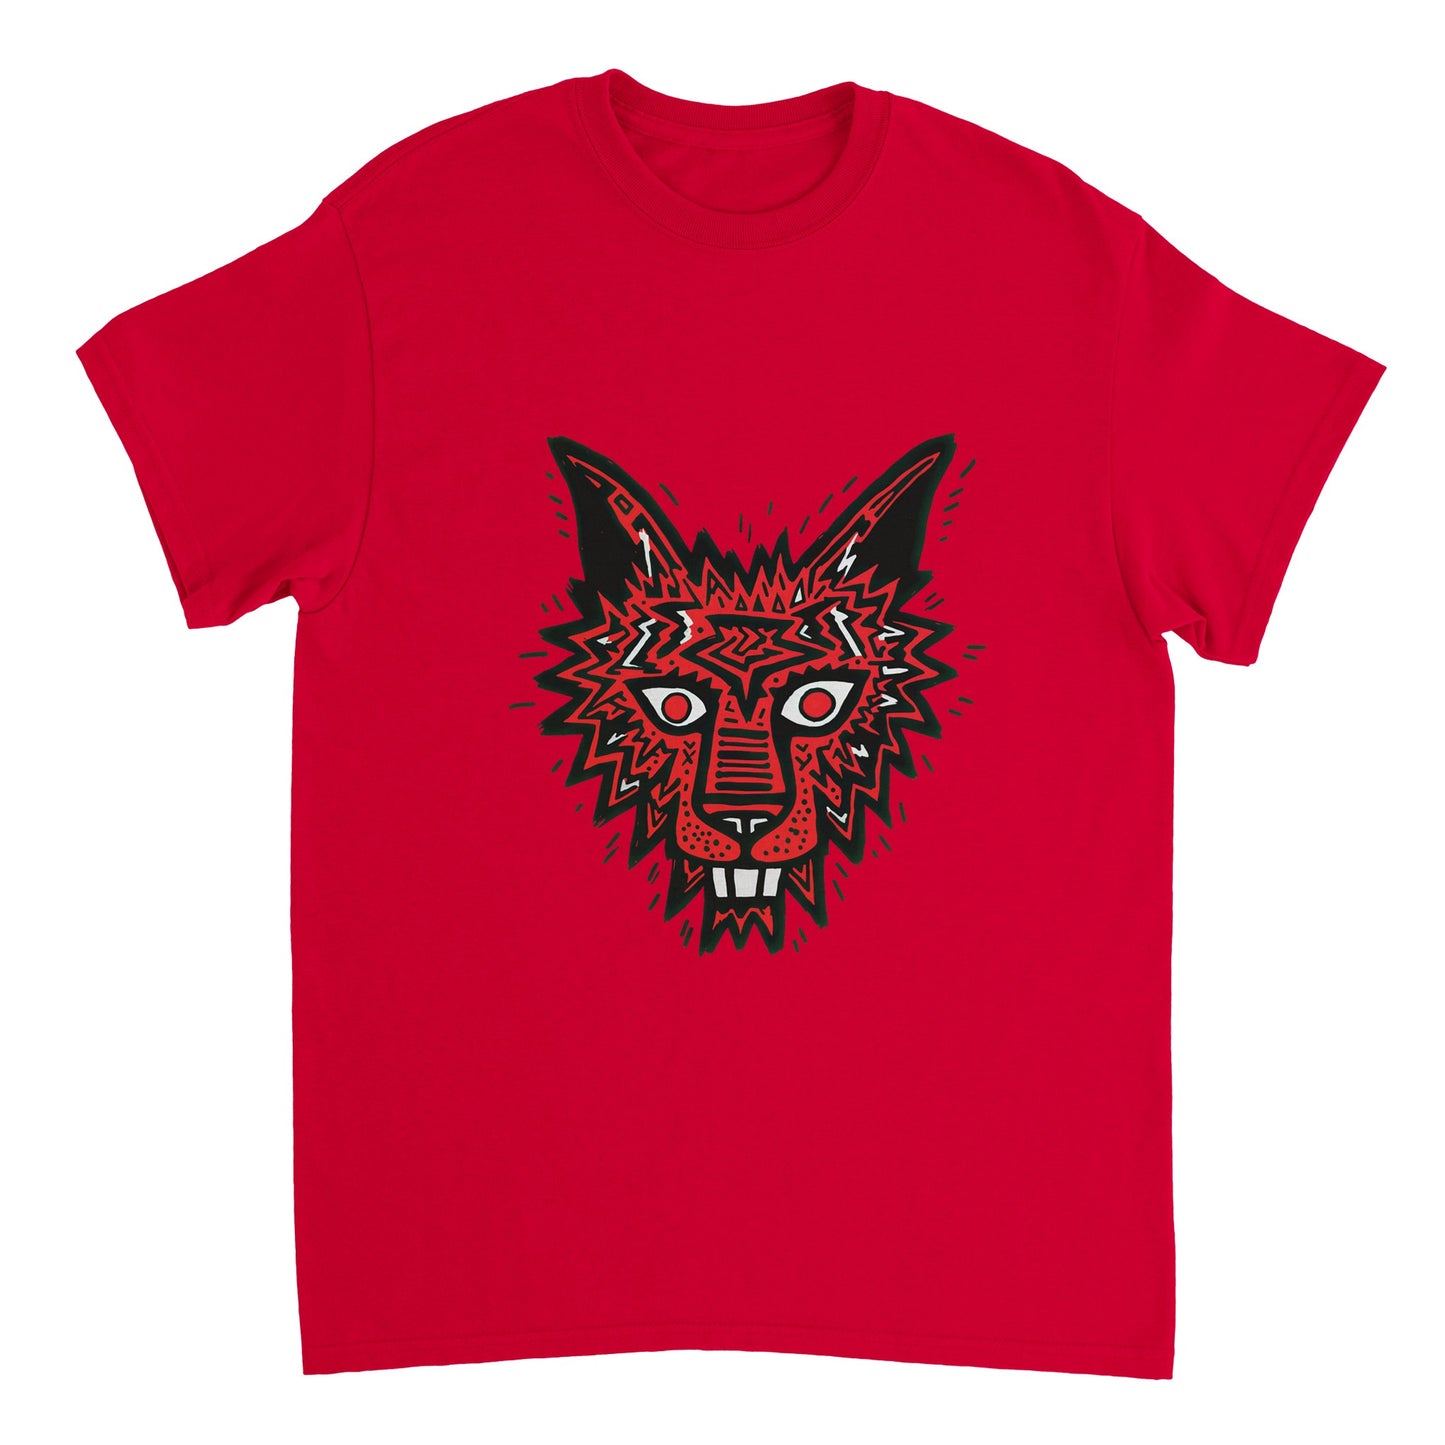 Red Wolf - Spooktacular Collection - Unisex Crewneck T-shirt